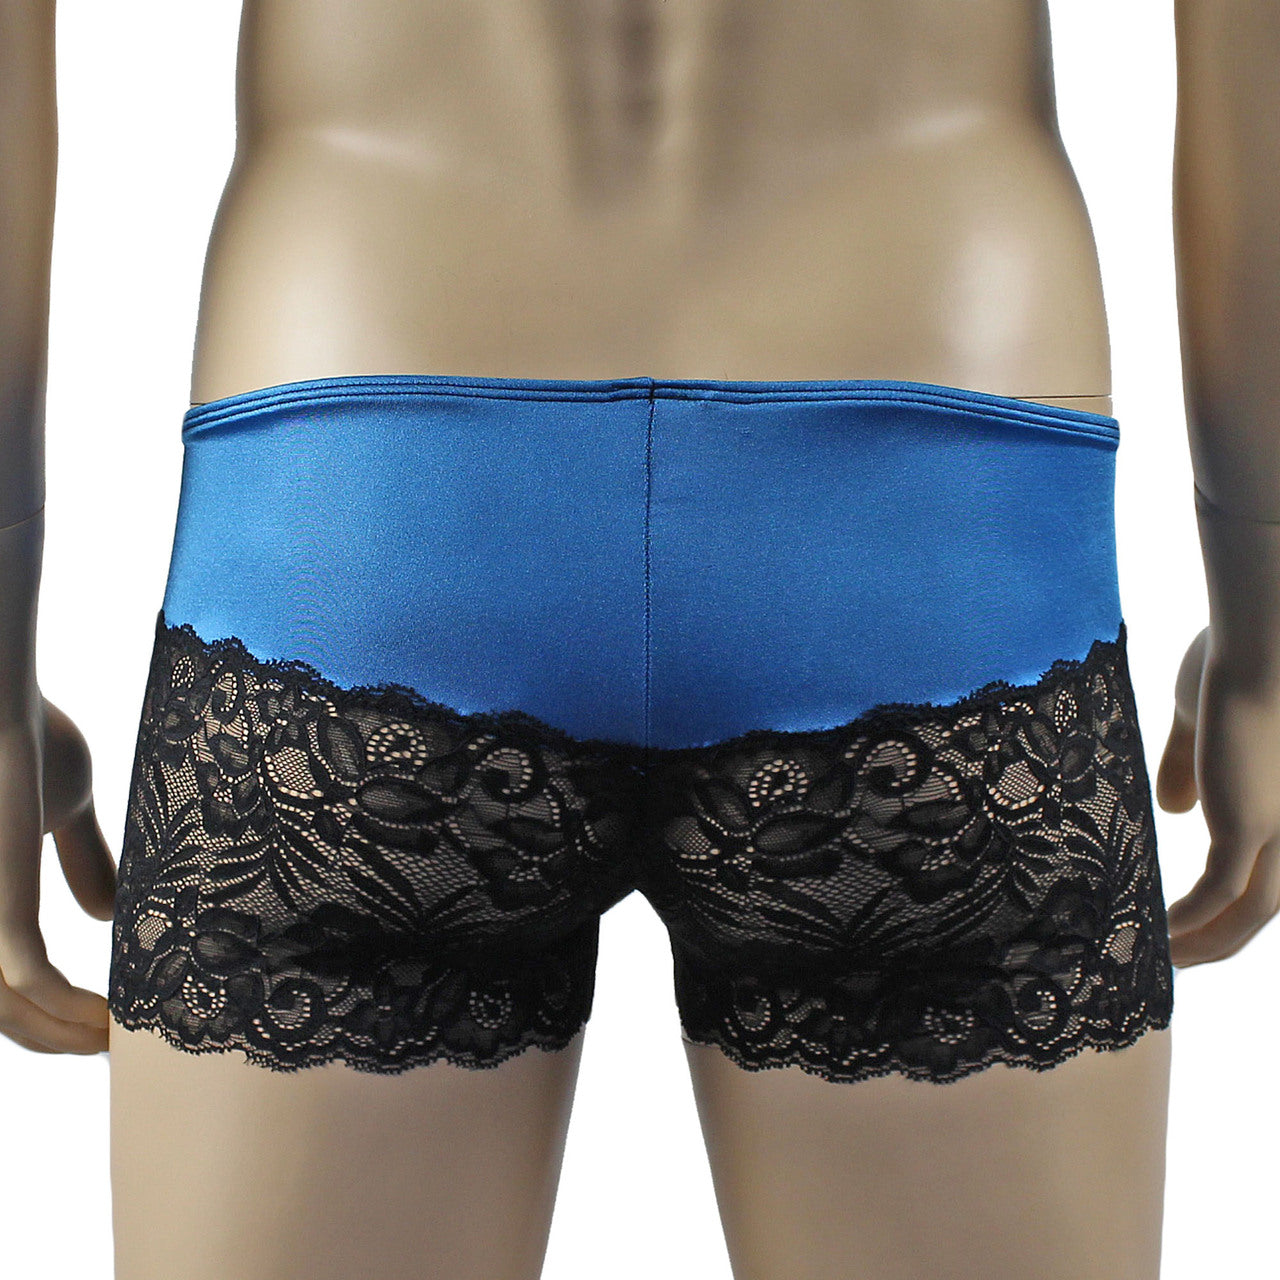 Mens Risque Boxer Briefs with Detachable Garters & Stockings (teal and black plus other colours)